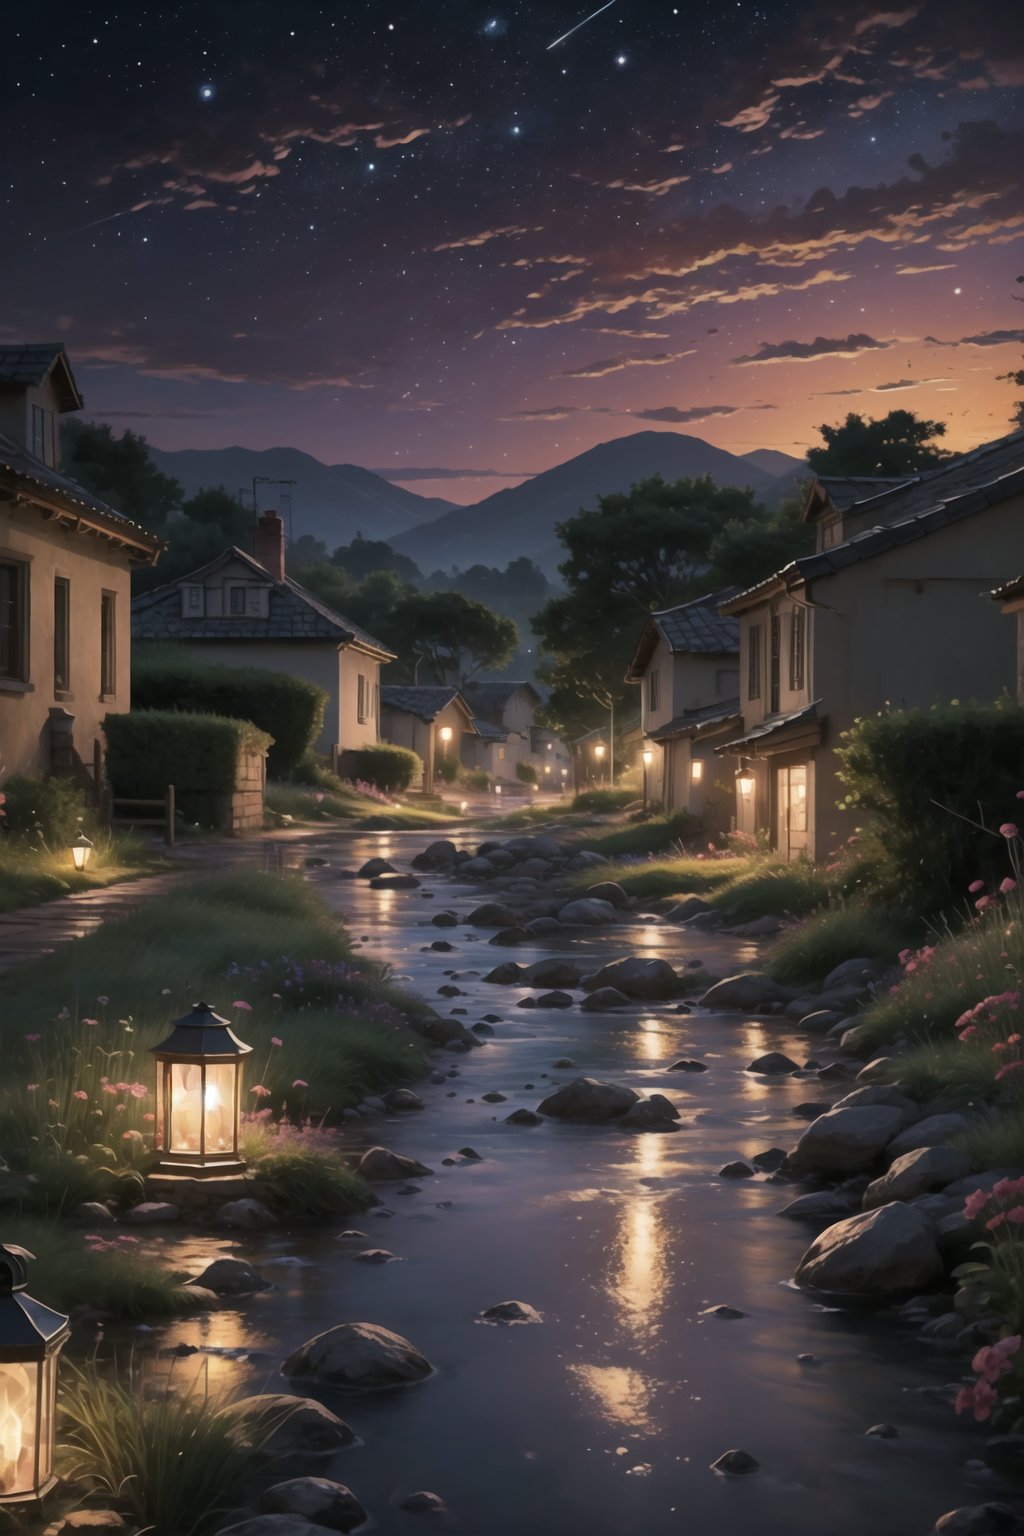 Intricate details, cinematic lighting, a small traditional village by the sea, the starry sky fading into night, winding paths, dreamlike atmosphere, colorful starry sky, peaceful atmosphere, country-like atmosphere and no one around, at night The starry sky, the clean and visible Milky Way, the dark red sunset, the sky with a slightly pinkish-purple sunset color, the thin stream running through the small town, the greenery on the bank of the stream is dim, the sky takes up 2/3 of the screen